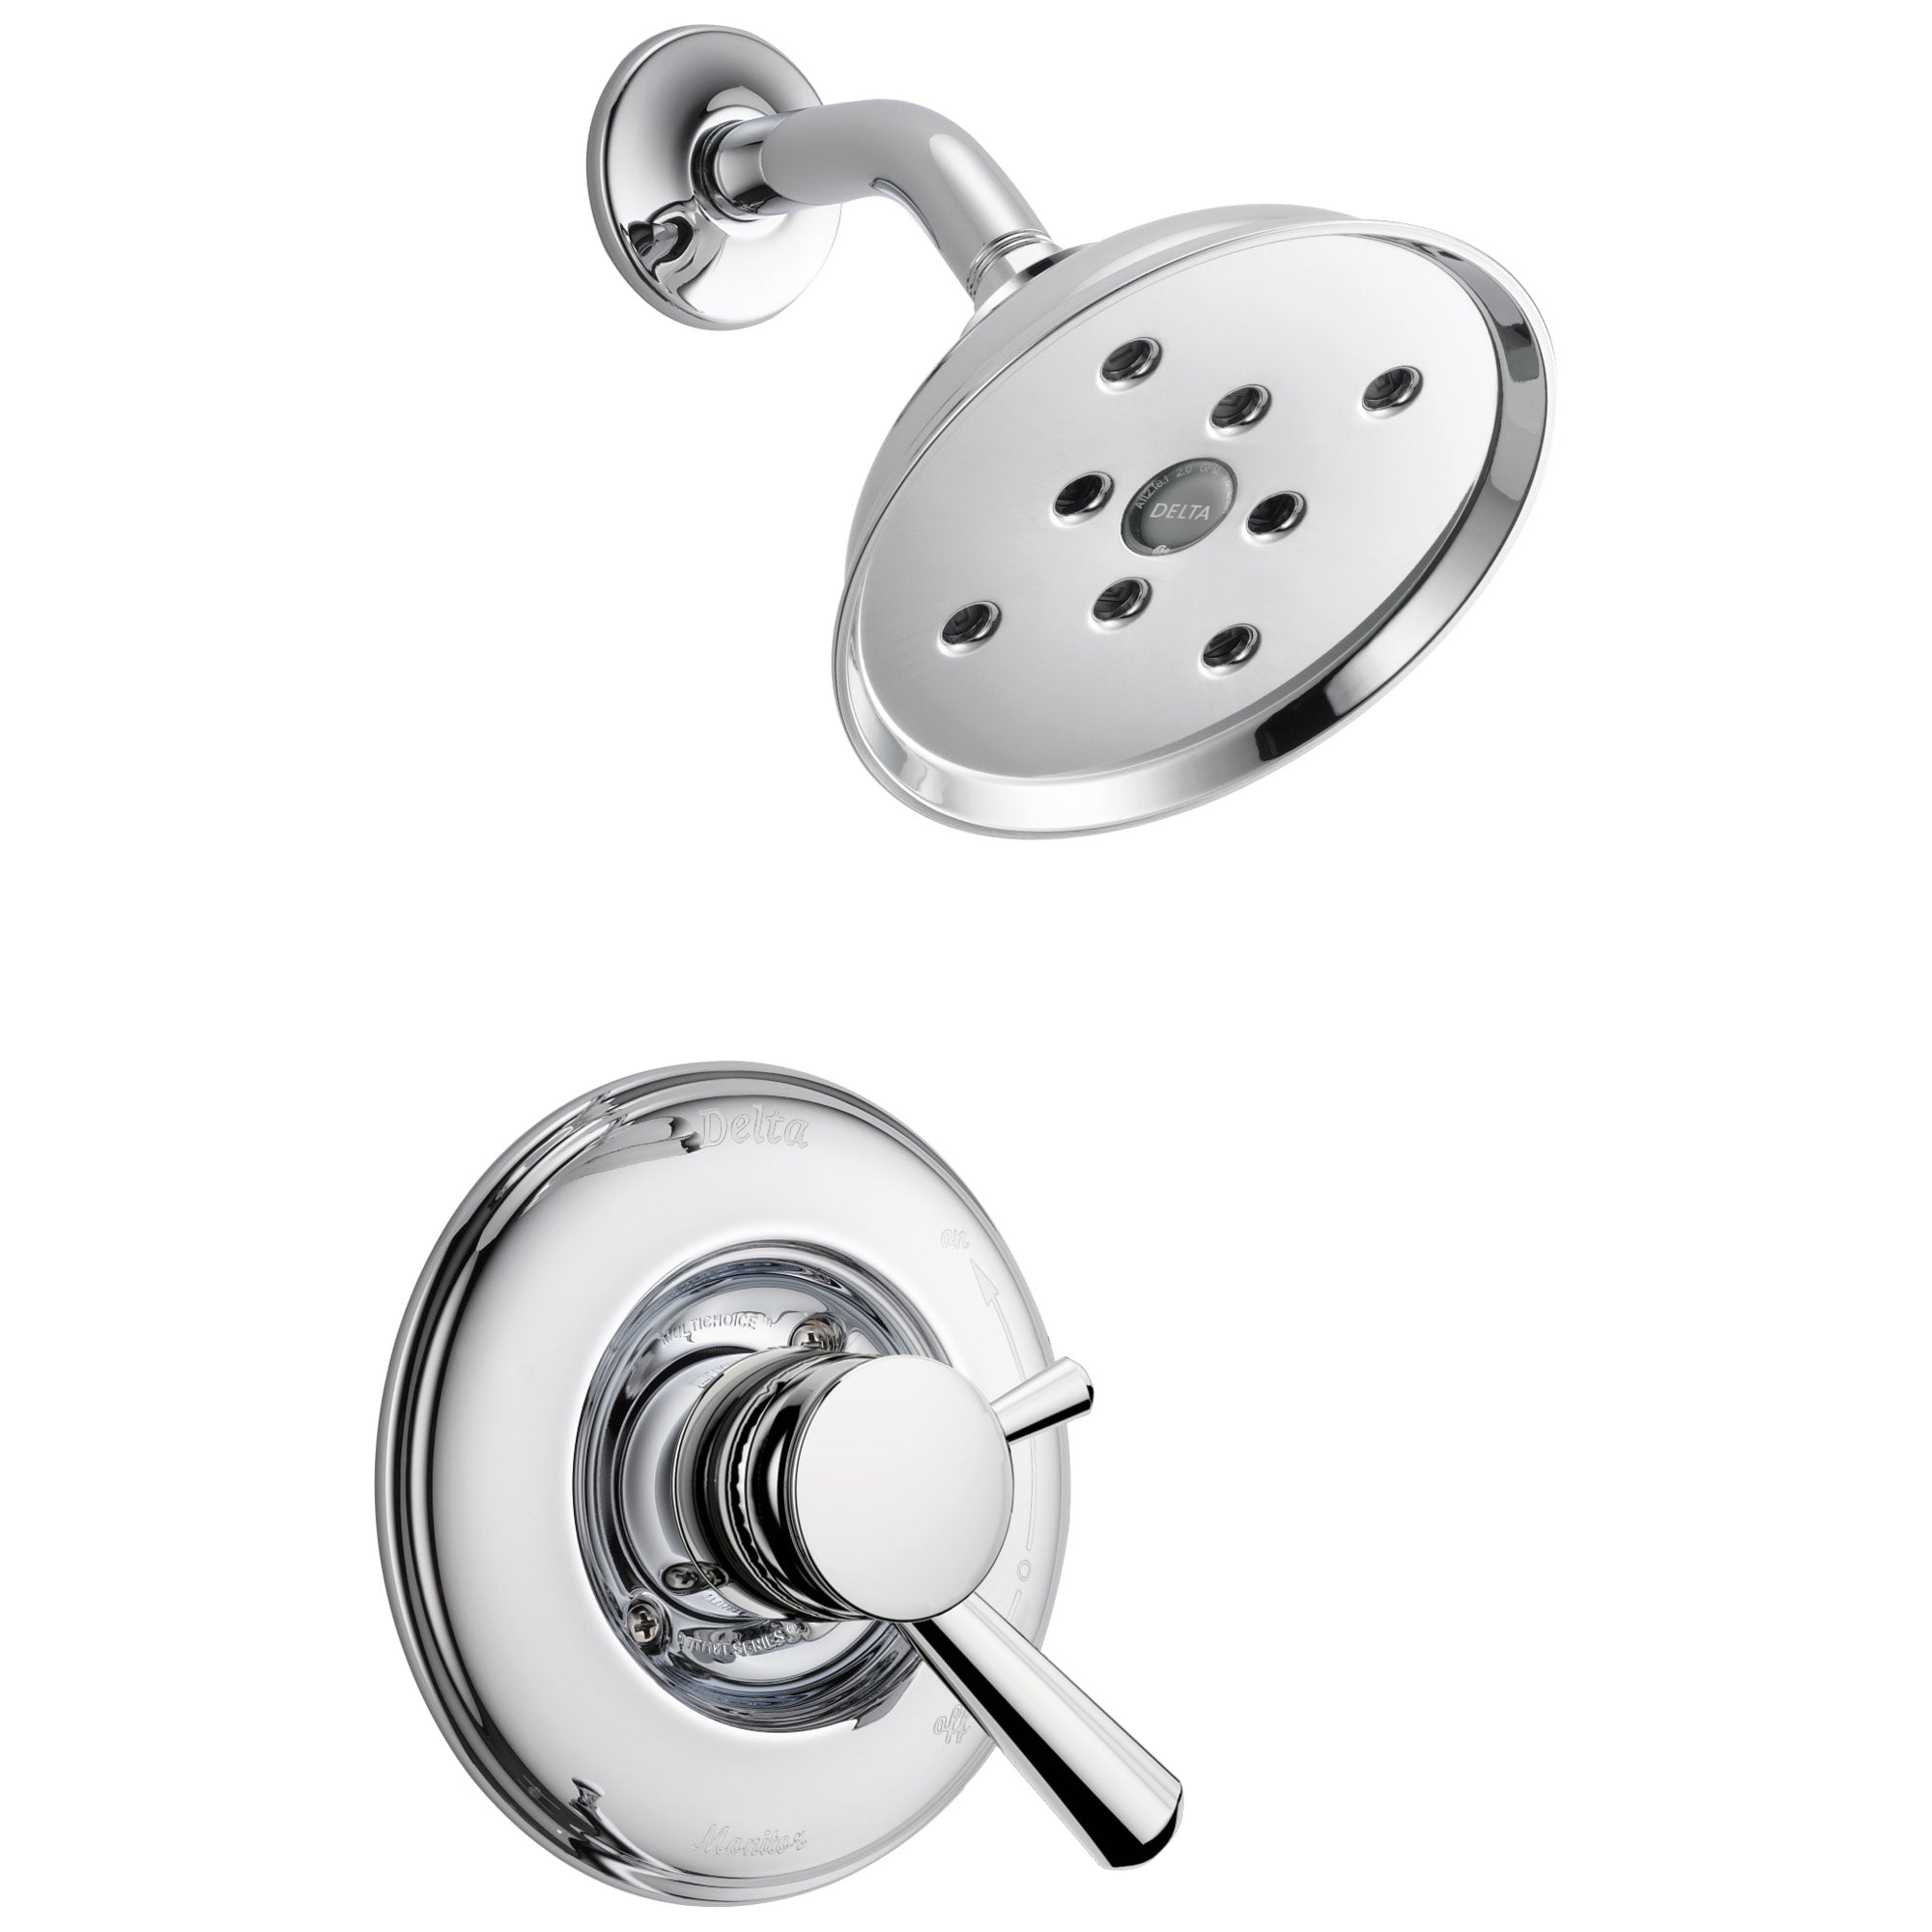 Delta Linden Collection Chrome Monitor 17 Shower only Faucet Trim with Separate Temperature and Pressure Controls (Valve Sold Separately) DT17293